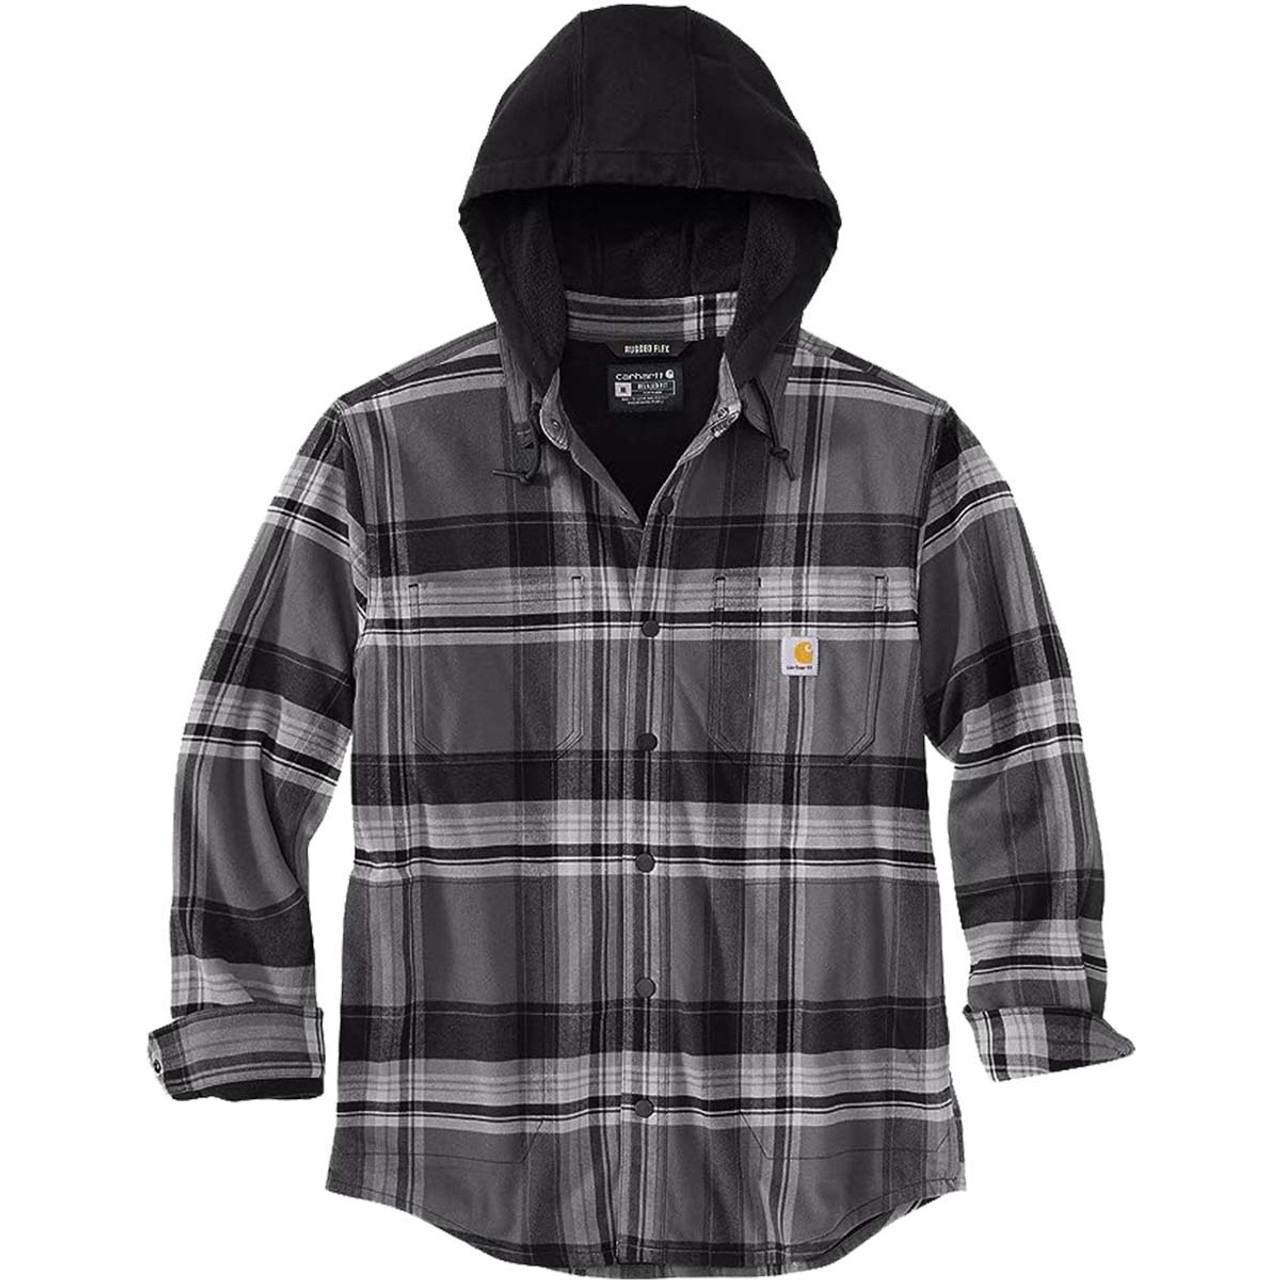 Carhartt Rugged Flex Relaxed Fit Flannel-Lined 5-Pocket Jean